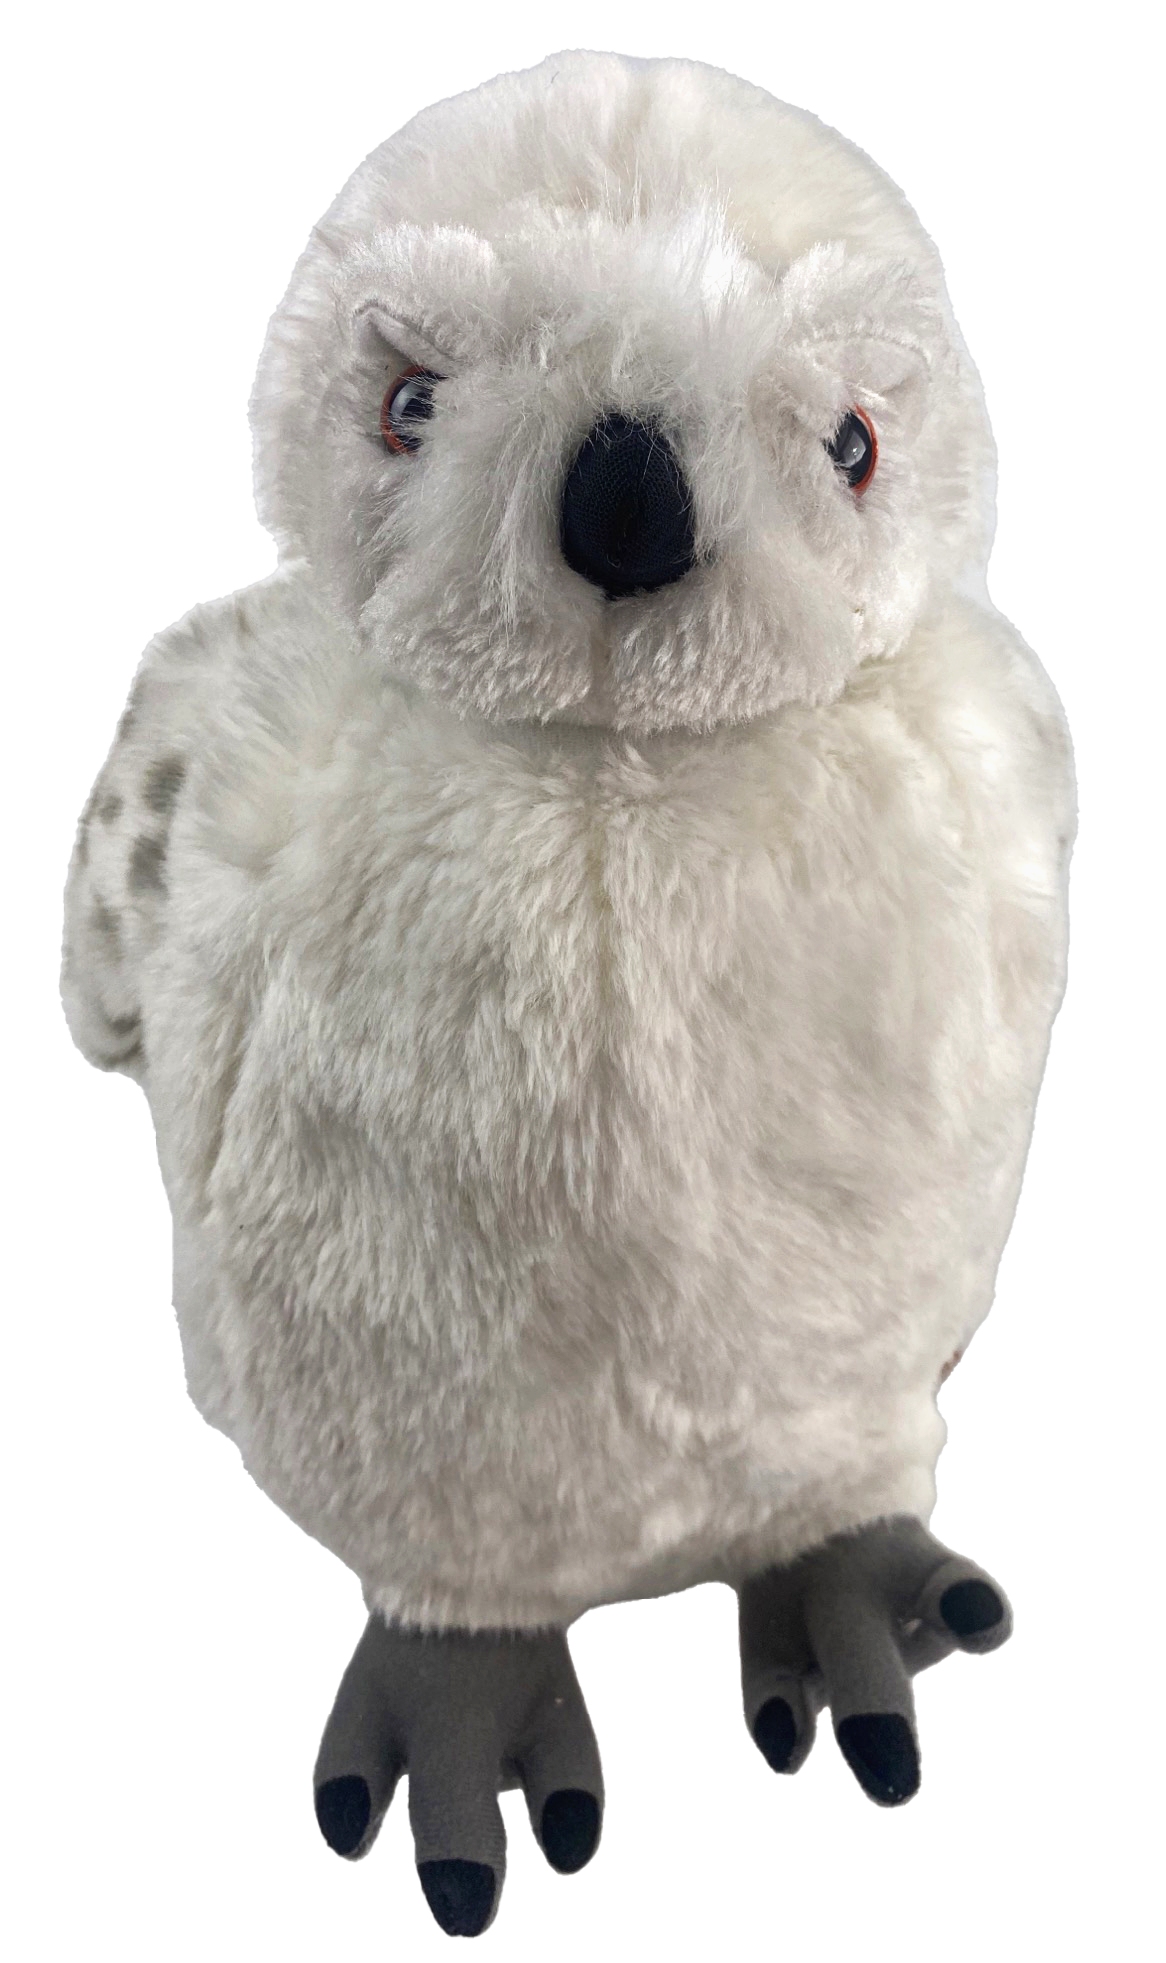 Harry Potter Plush Toys: Hedwig Toys and Much More